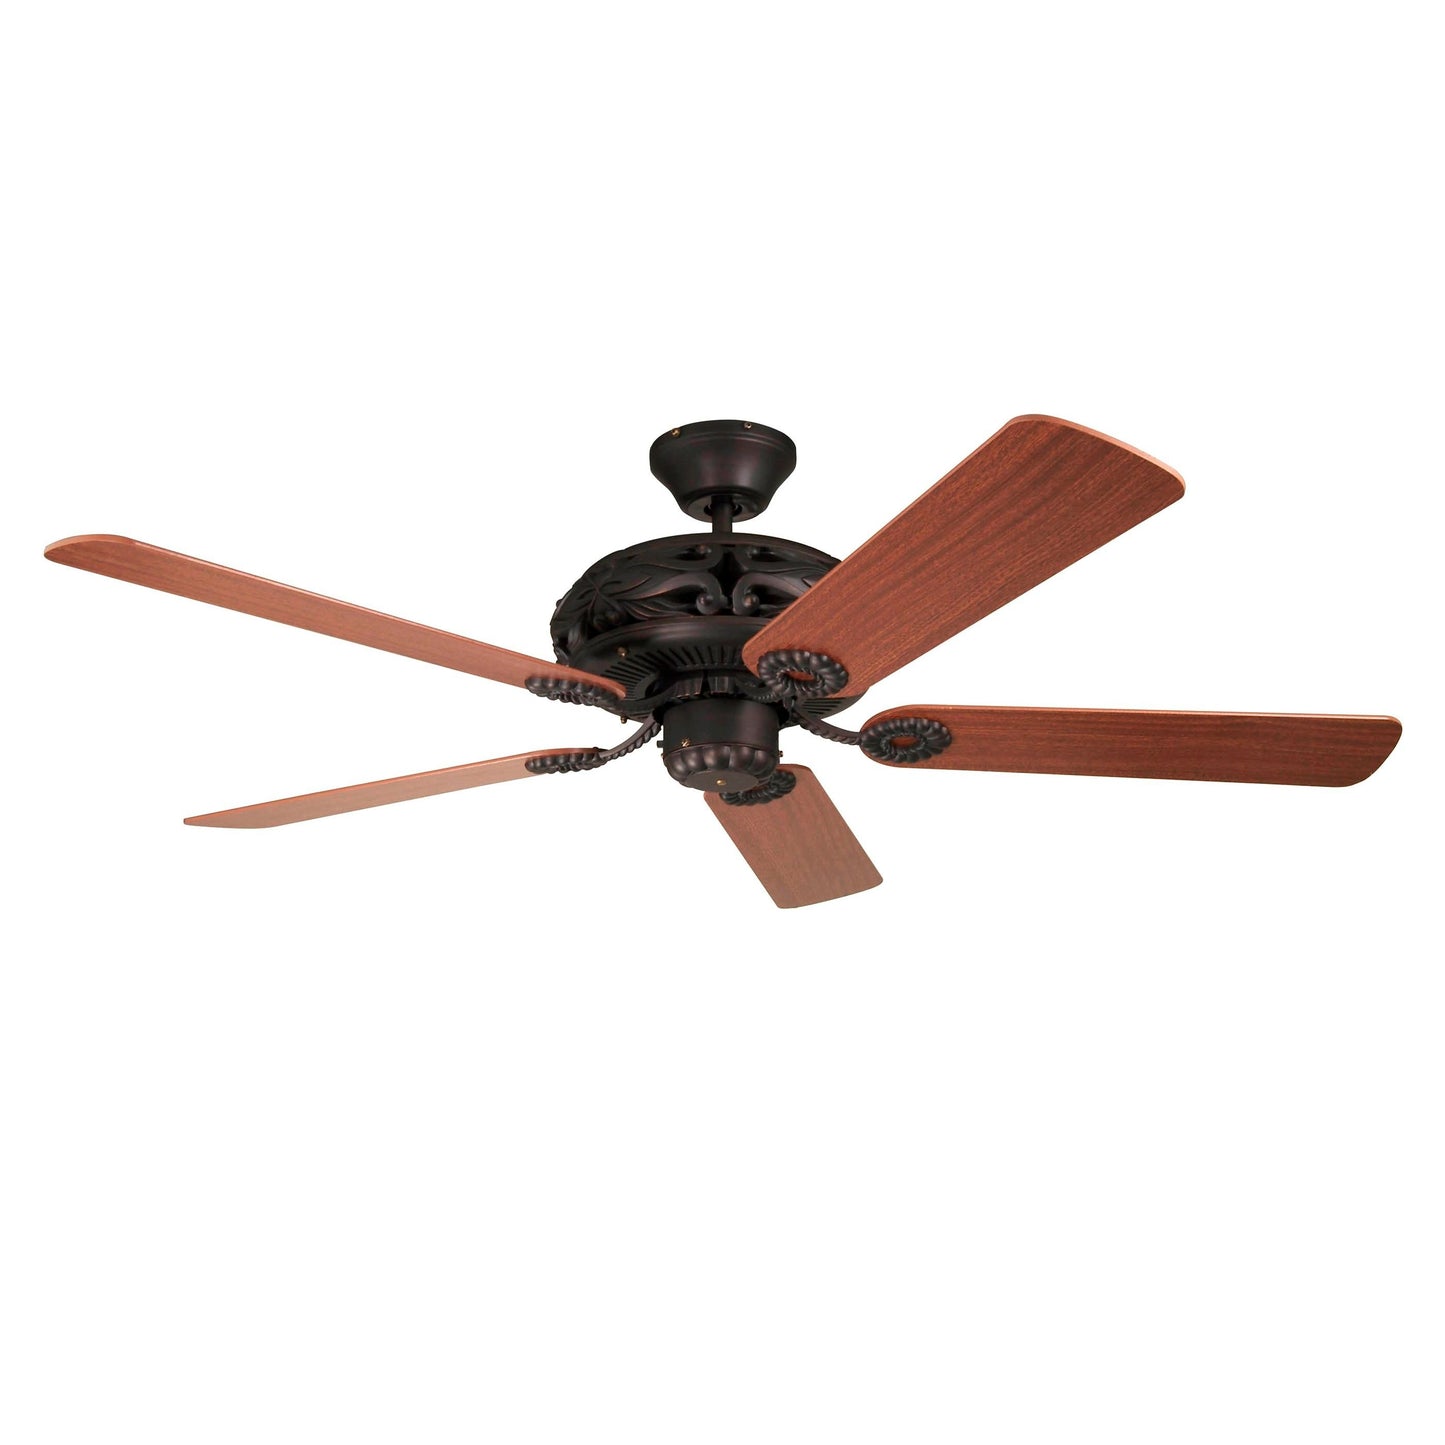 GD52ABZ5C - Grandeur 52" 5 Blade Ceiling Fan with Light Kit - Pull Chain - Aged Bronze Brushed